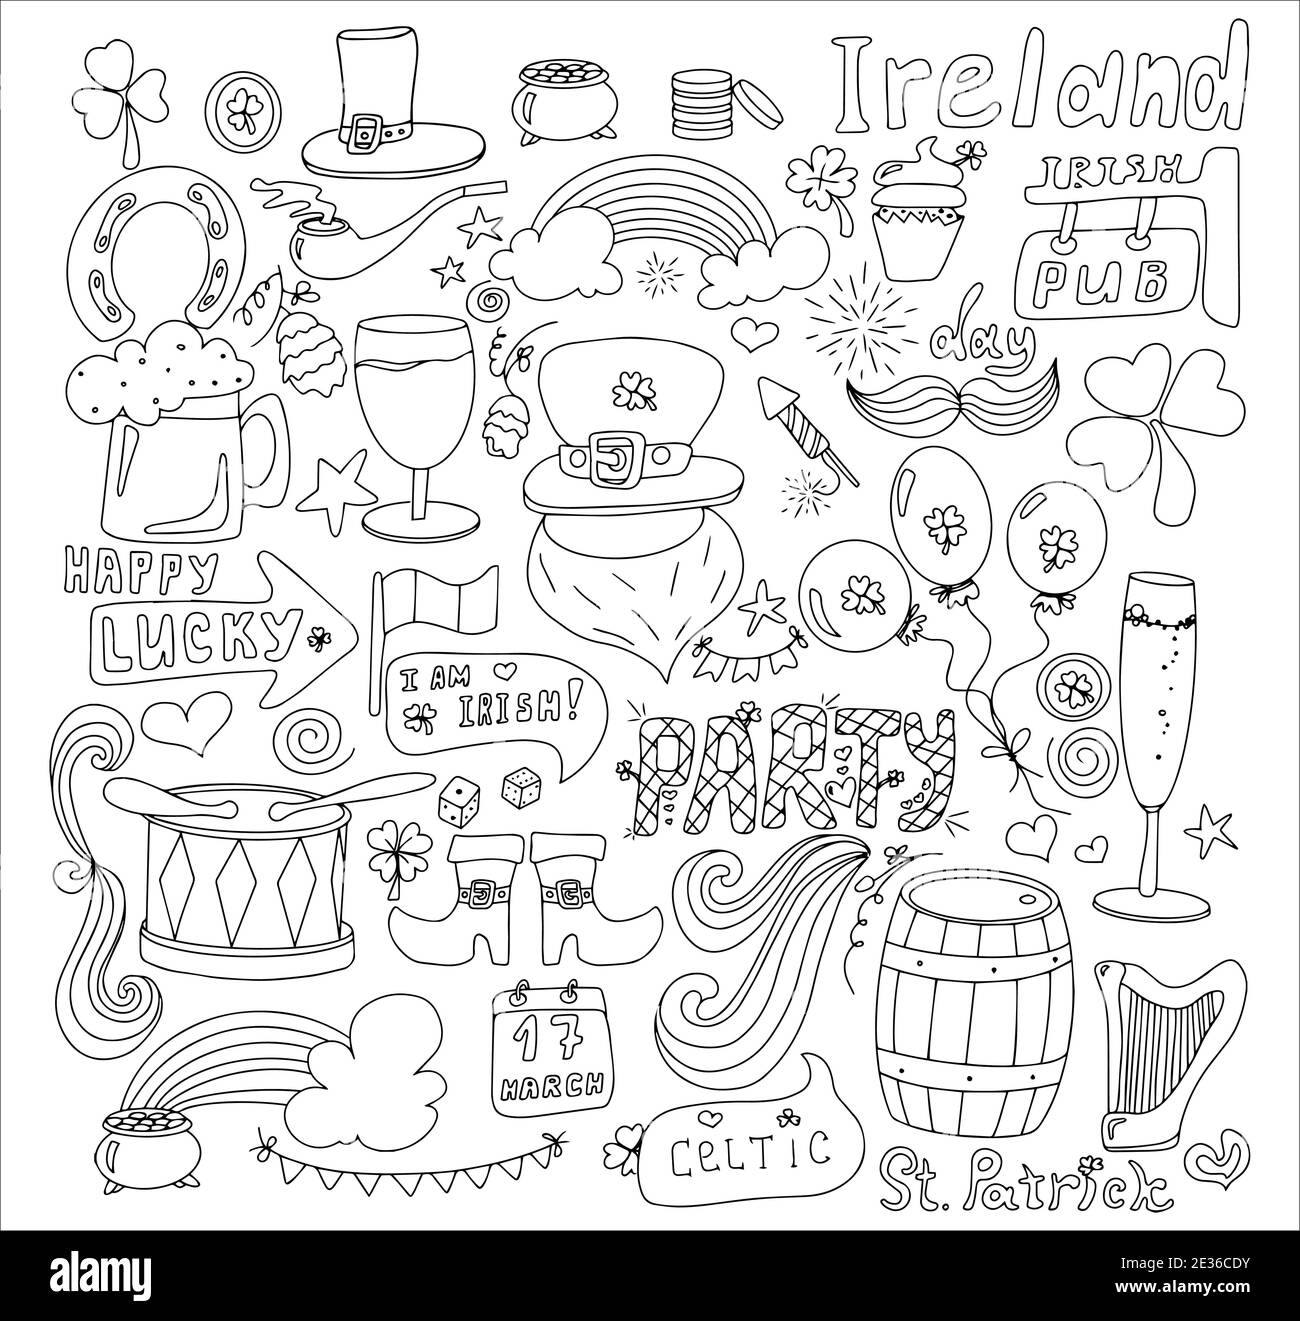 St. Patrick s Day greeting card with hand-drawn pictures. A doodle of beer, a rainbow, a leprechaun s beard, coins, a bowler hat, a clover, a top hat, an Irish flag and a beer mug. Template for a postcard, invitation, advertisement or banner for the Irish holiday of March 17. Vector illustration. Stock Vector